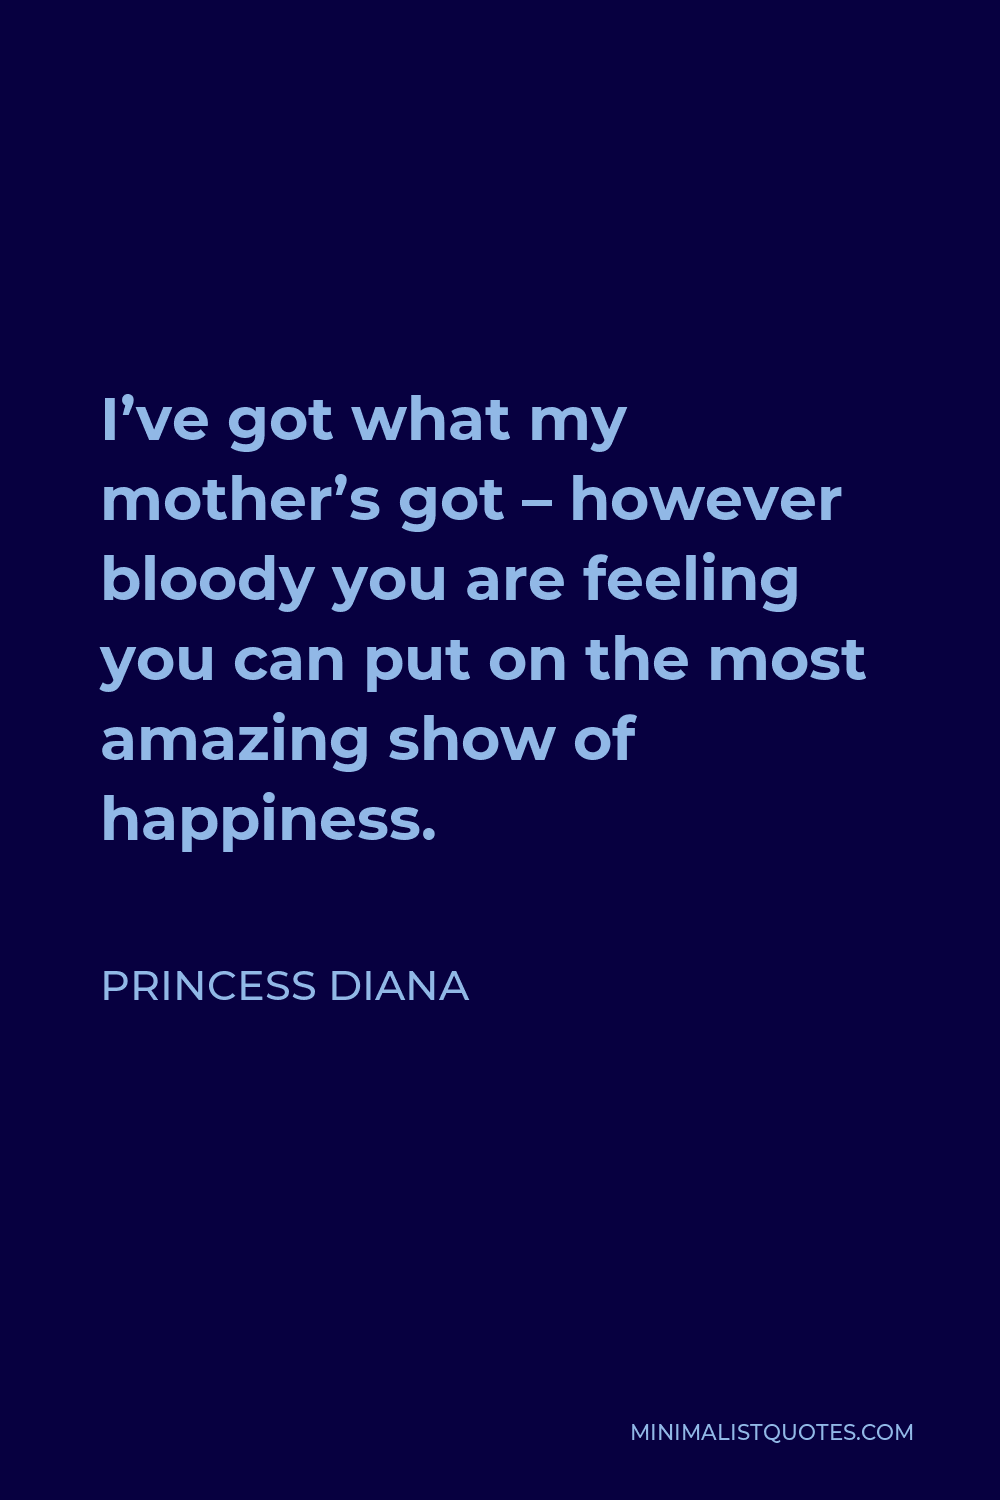 Princess Diana Quote - I’ve got what my mother’s got – however bloody you are feeling you can put on the most amazing show of happiness.